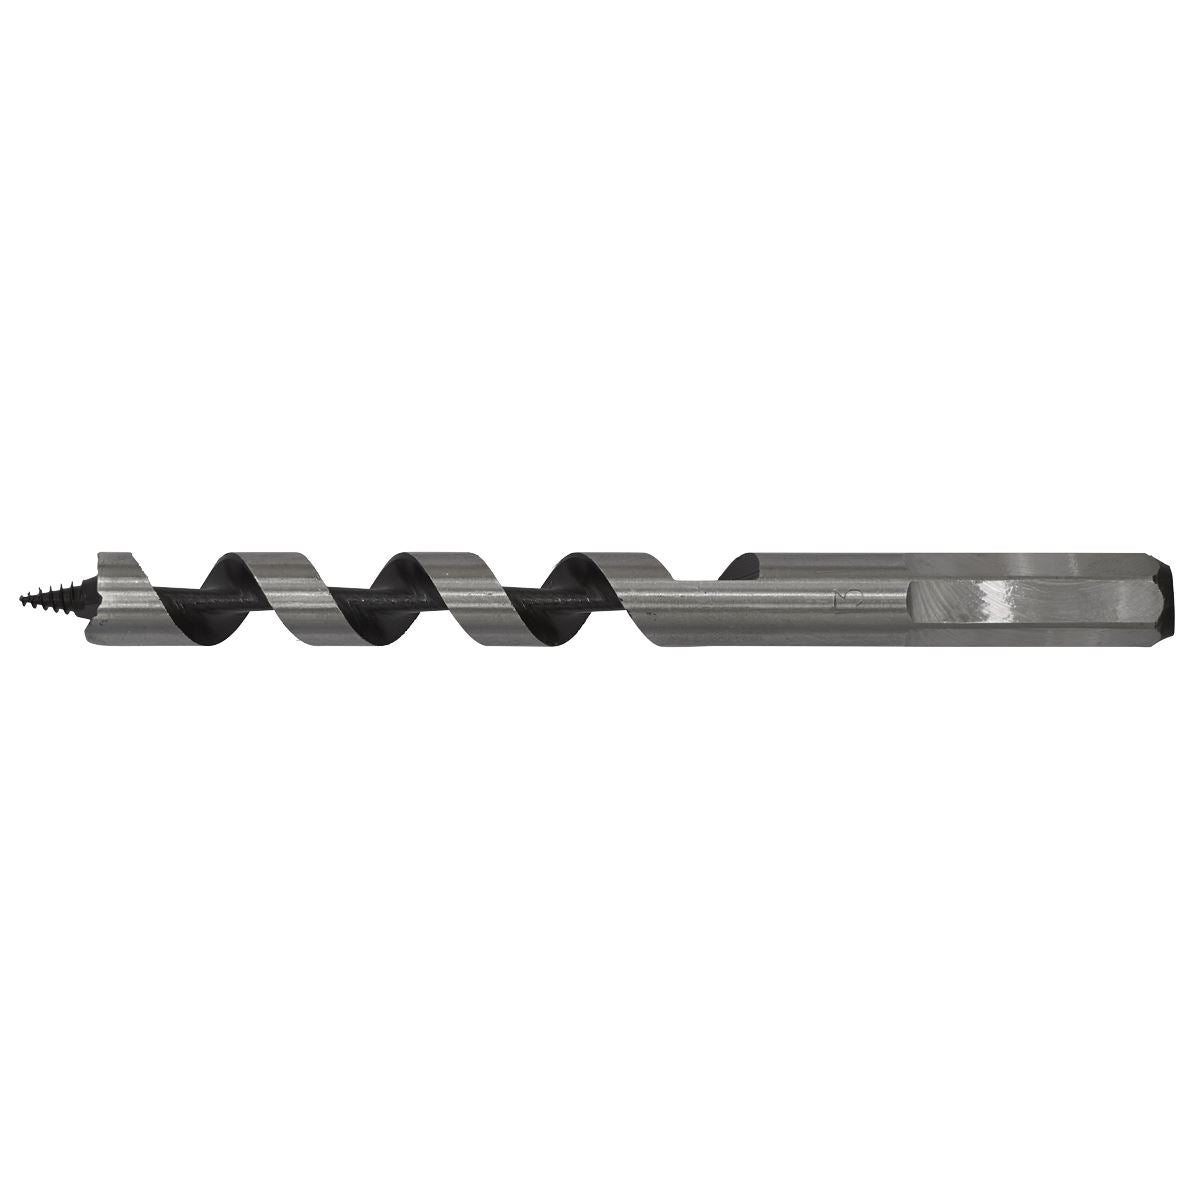 Worksafe by Sealey Auger Wood Drill Bit 13mm x 155mm